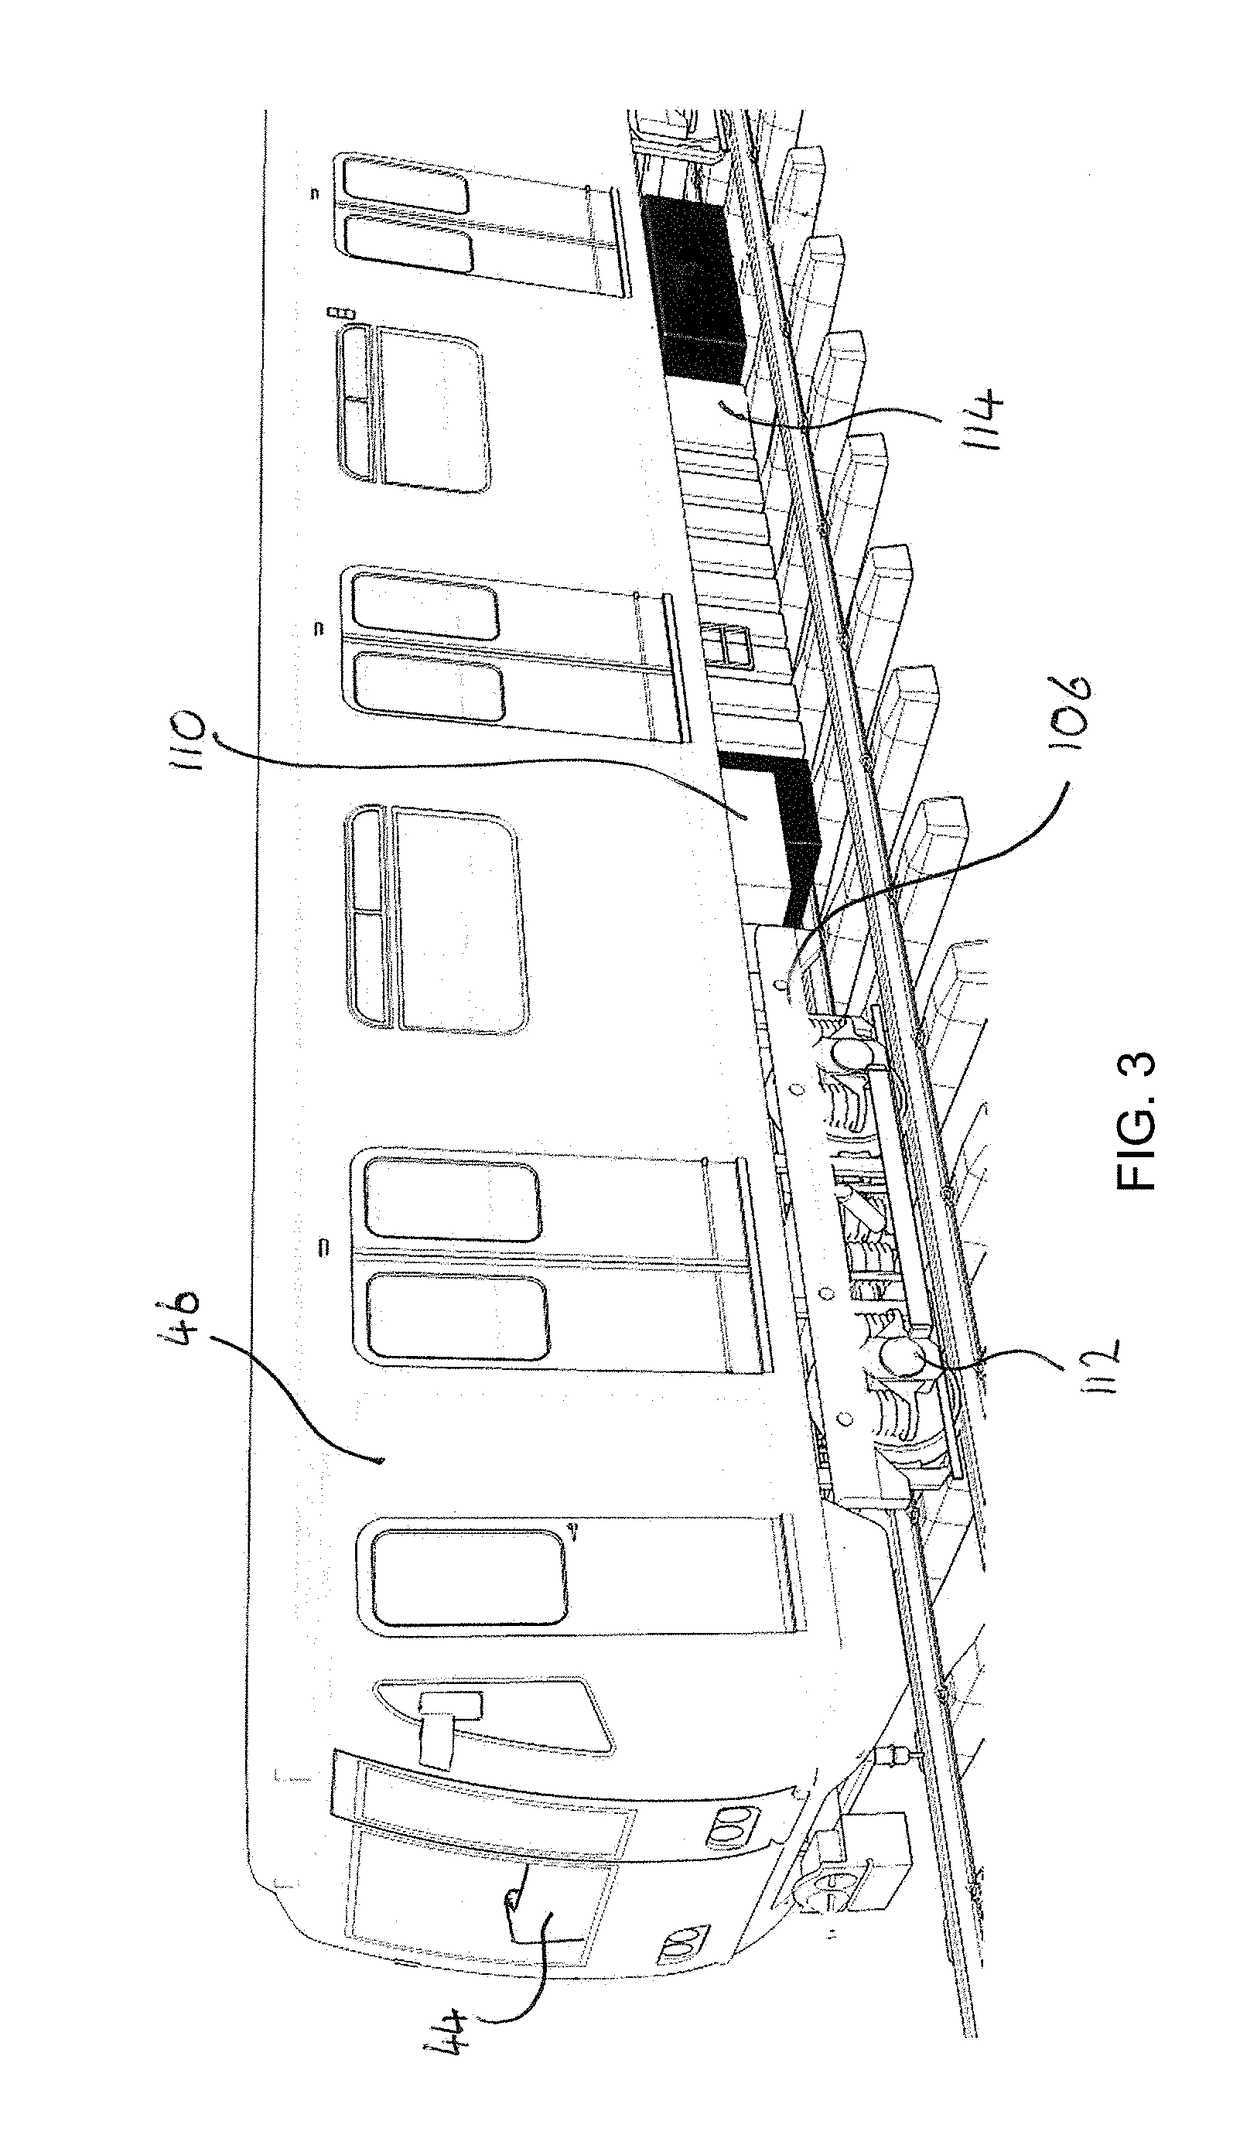 Integrated rail and track condition monitoring system with imaging and internal sensors